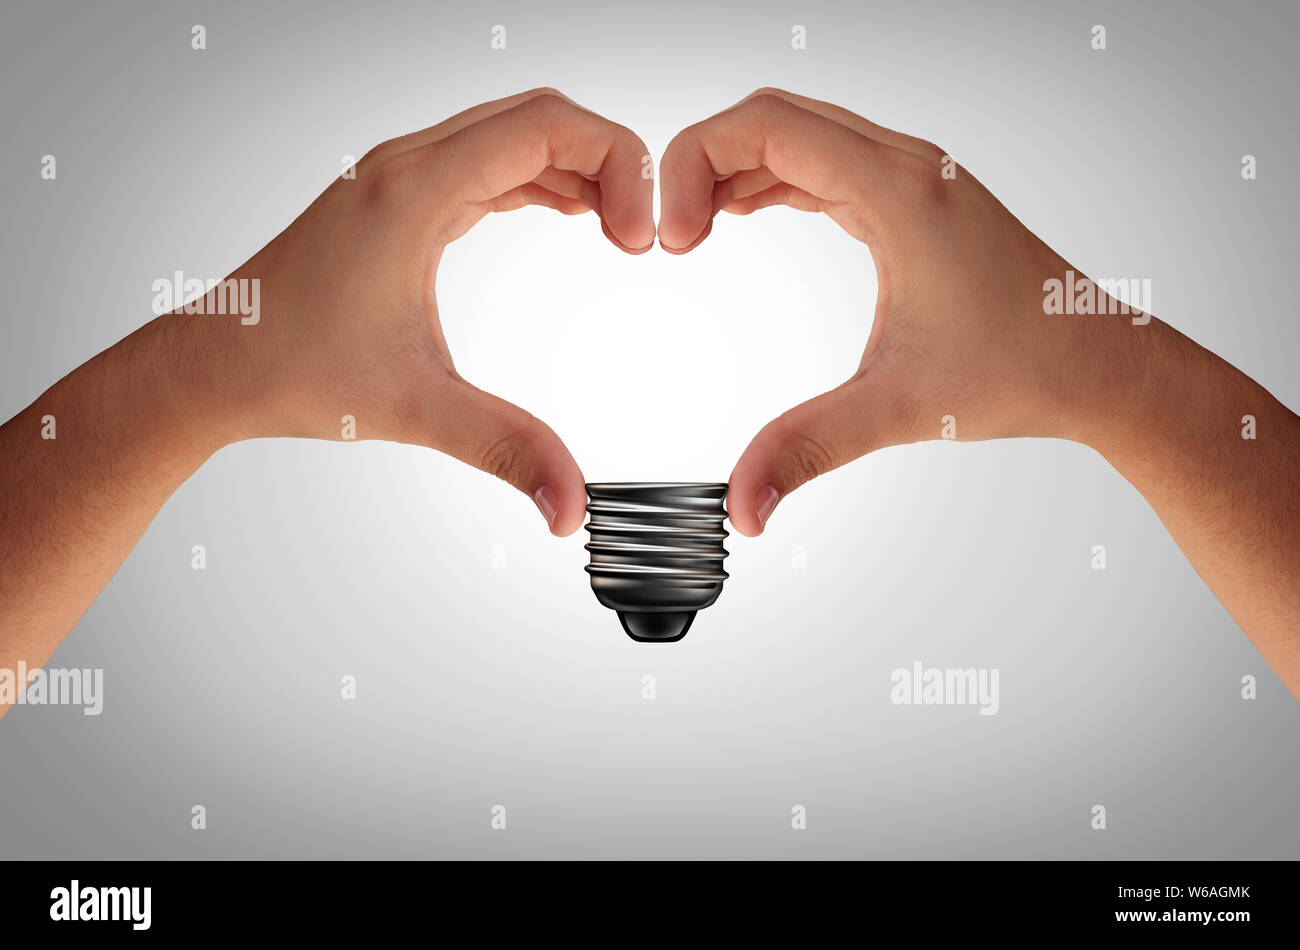 Abstract conceptual idea and creativity concept joining hands into the shape of an inspirational heart light bulb electric metaphor or business. Stock Photo